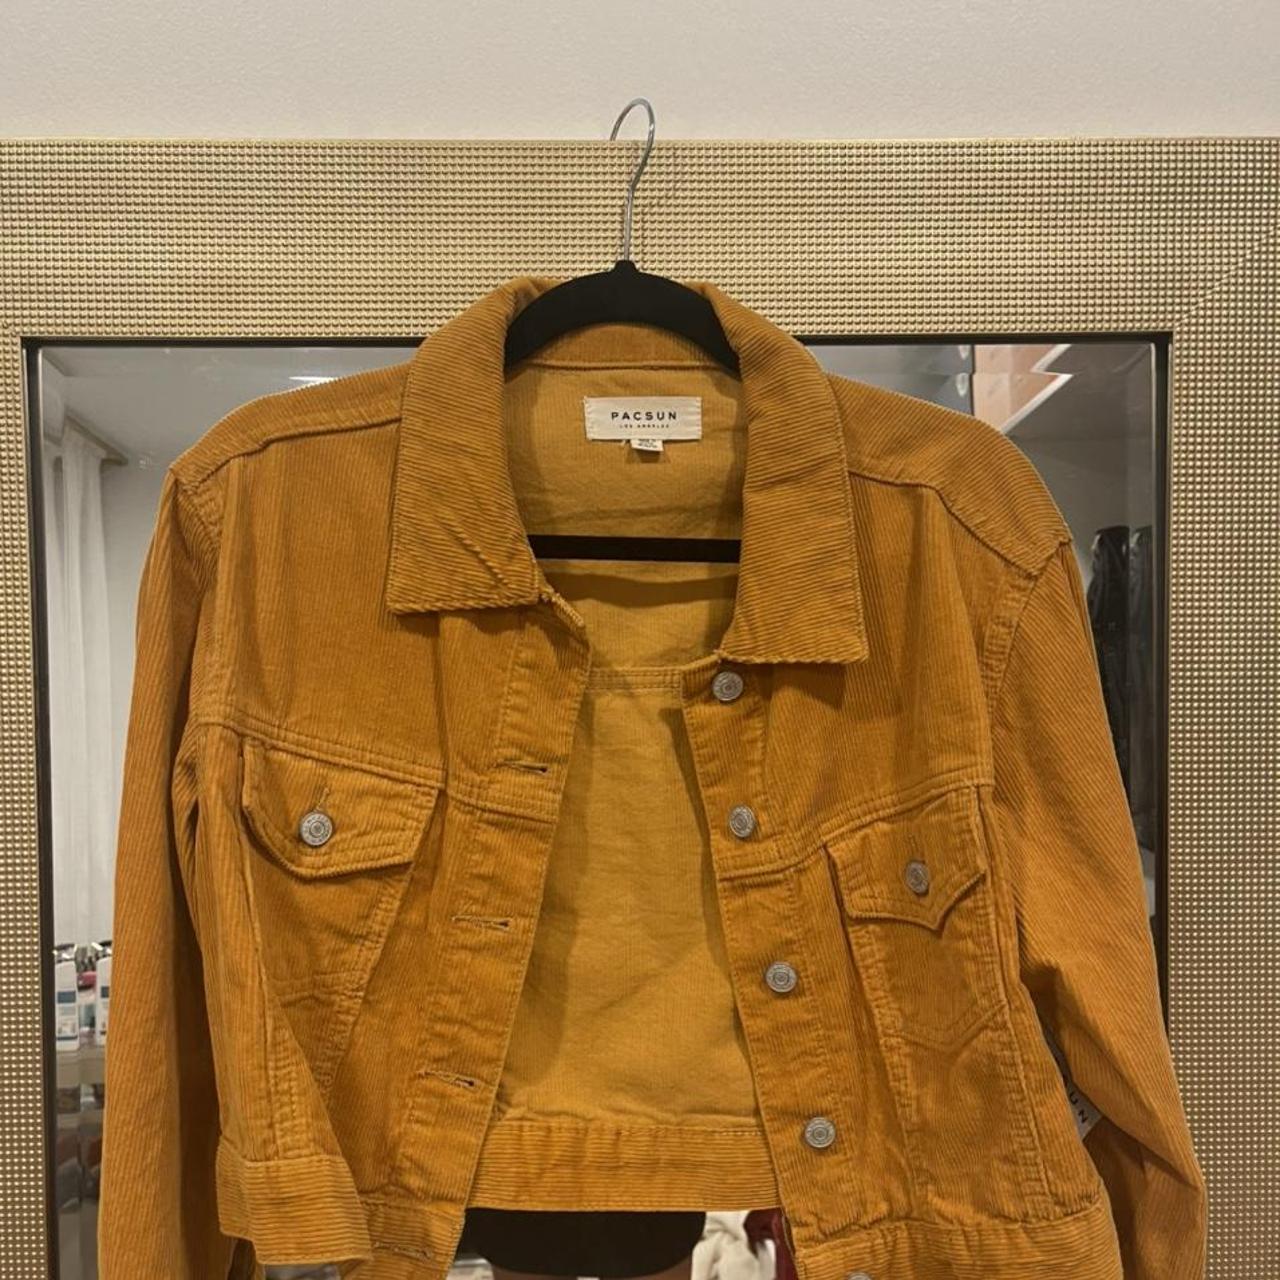 PacSun Women's Yellow and Tan Jacket (2)